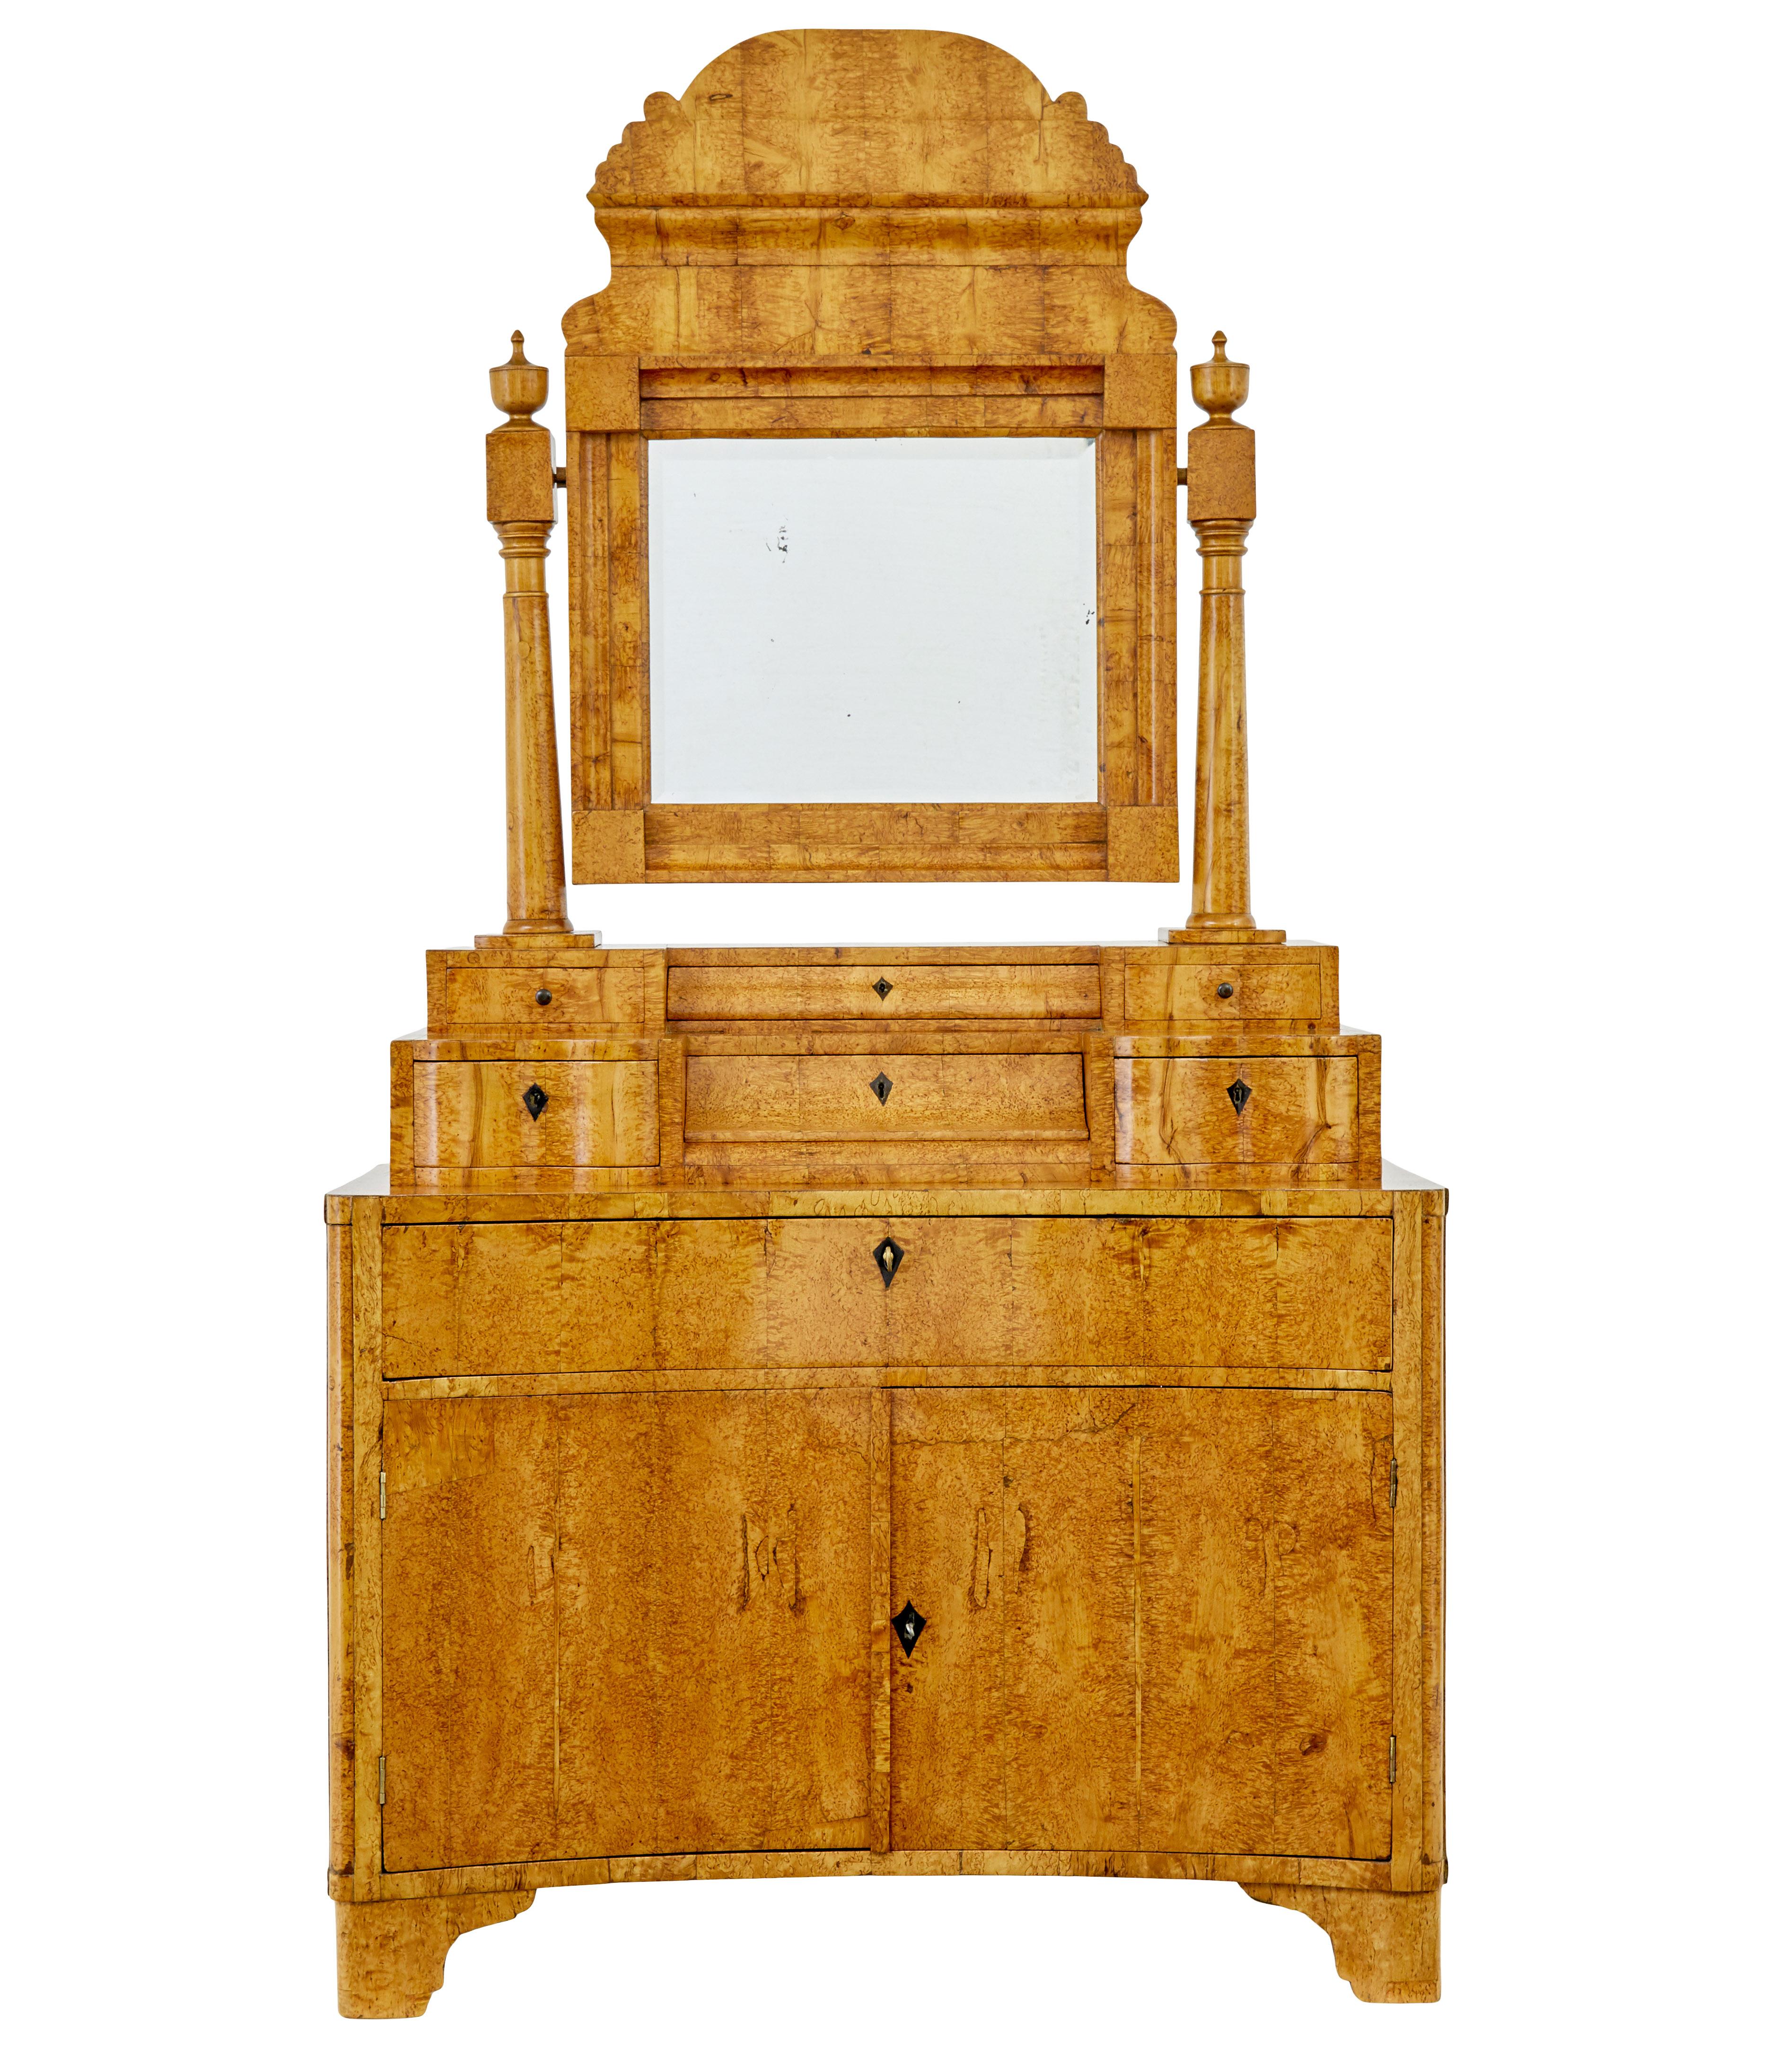 Early 19th century birch Biedermeier vanity dressing cabinet circa 1830.

Stunning piece of Biedermeier period furniture made in karelian birch.

Comprising of two main parts, although the mirror and supports are removable too.

Decorative tilting